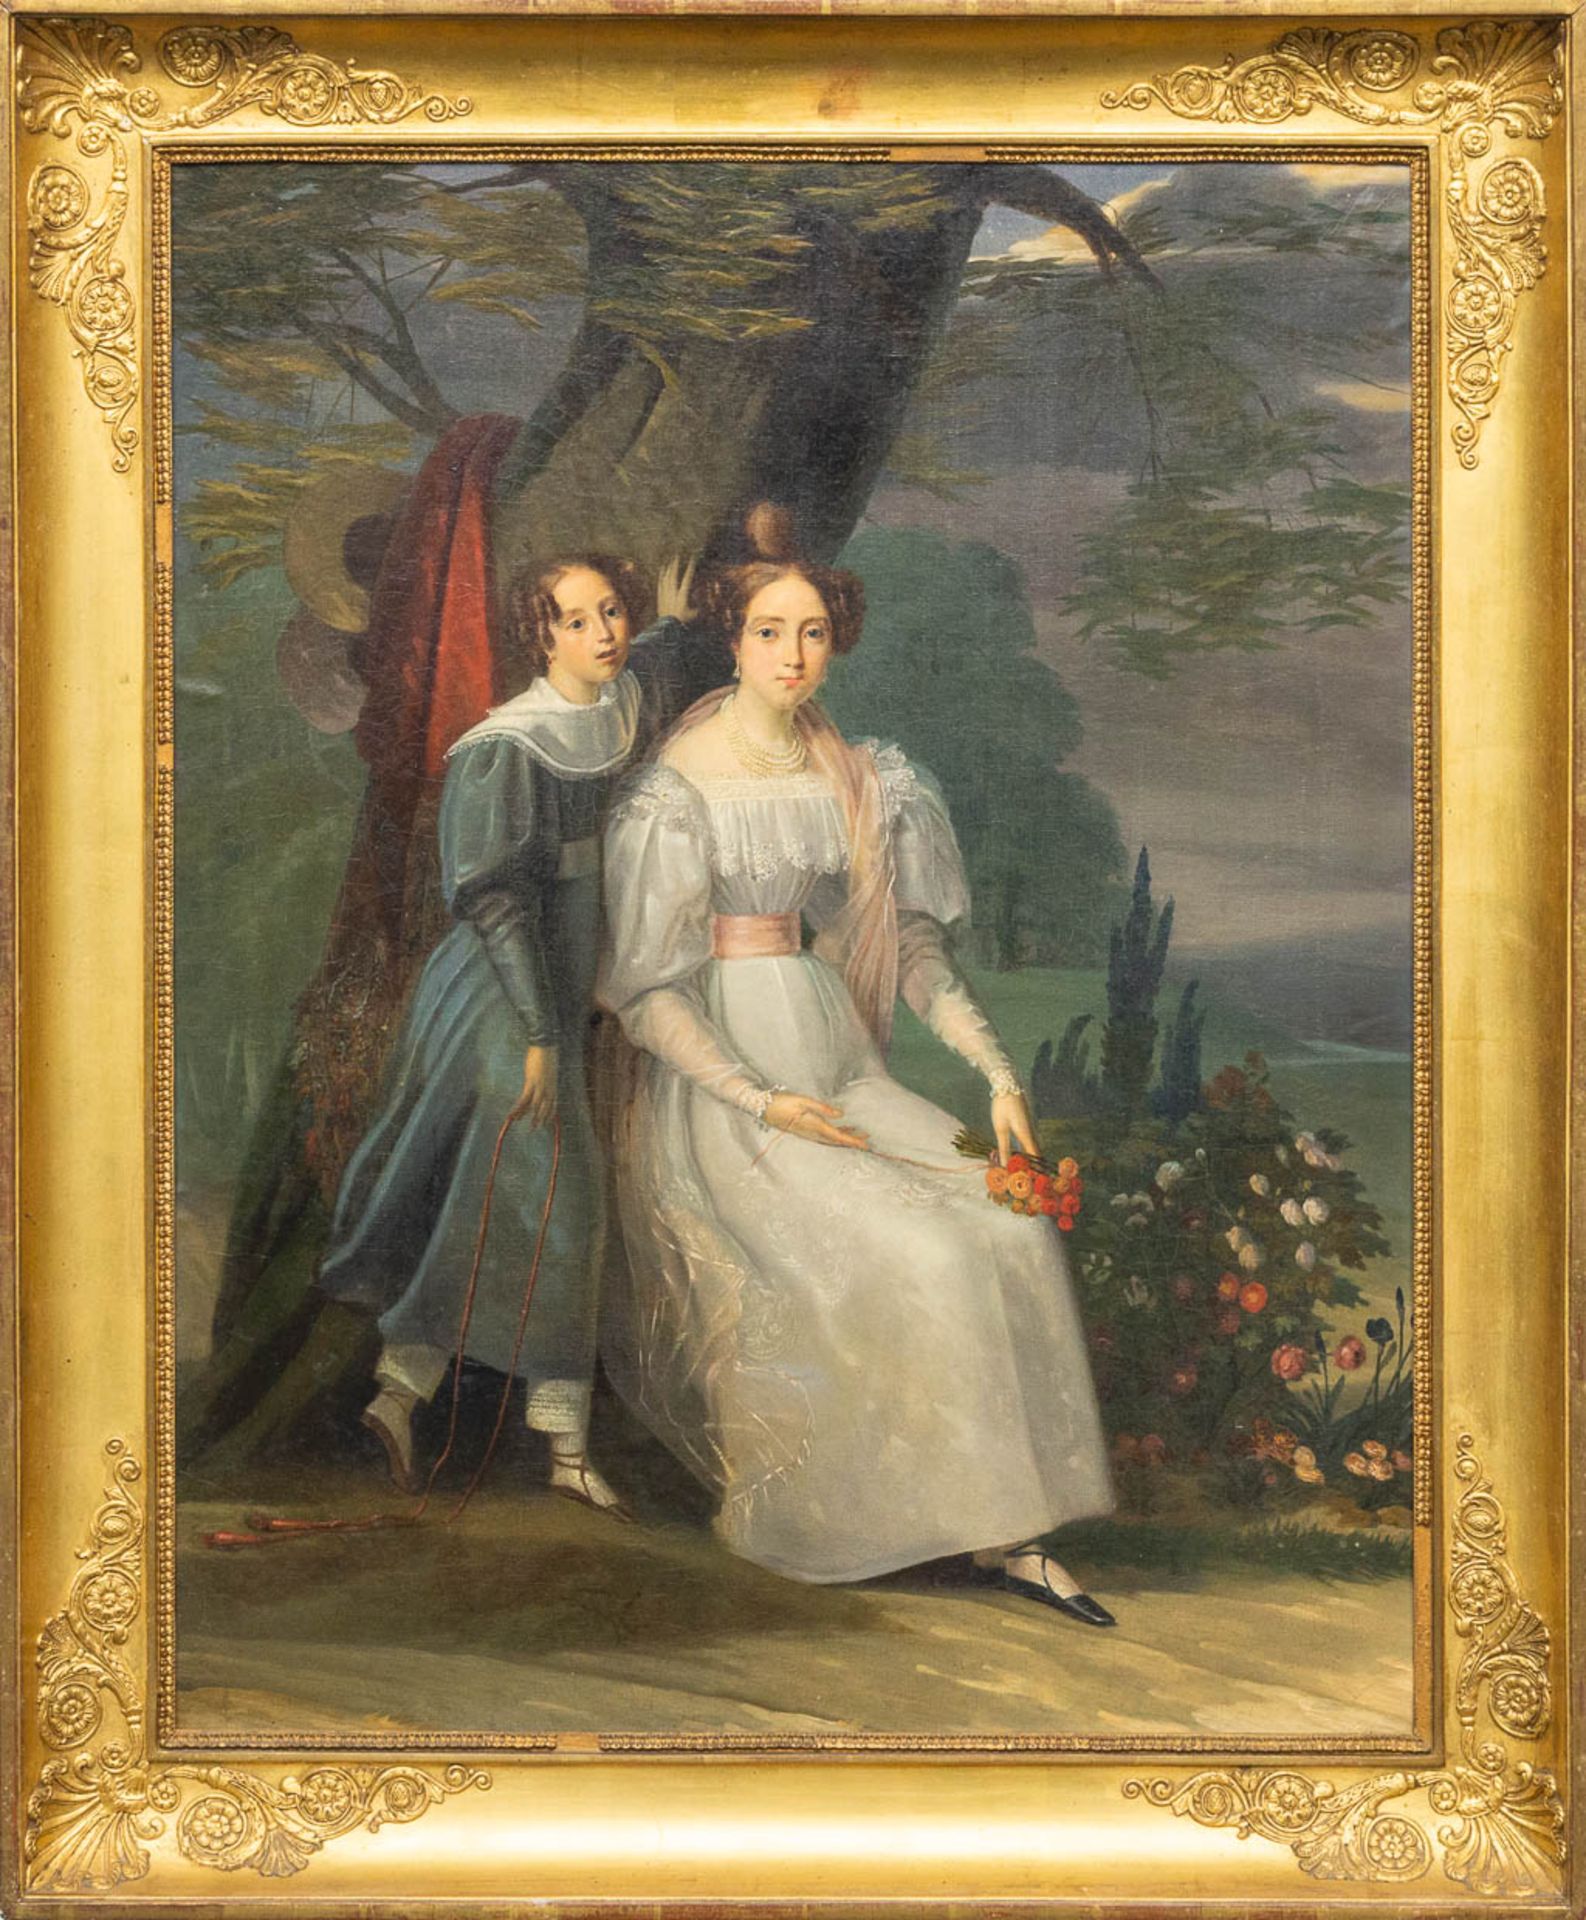 No signature found, an antique portrait of mother and daughter in an empire frame. First half of the